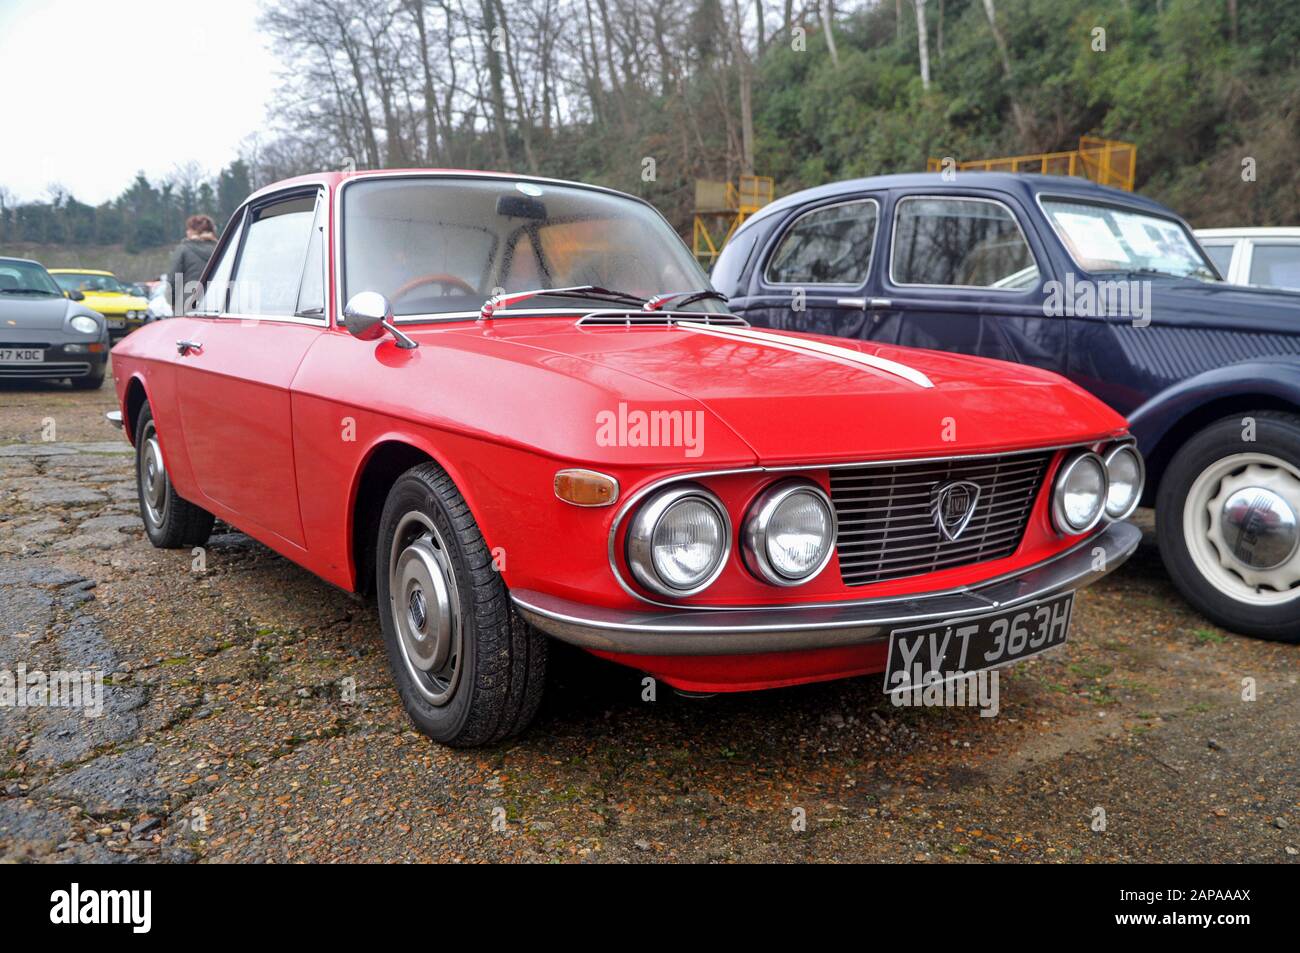 Brooklands New Years Day classic car meeting,  2015. Lancia Fulvia Stock Photo